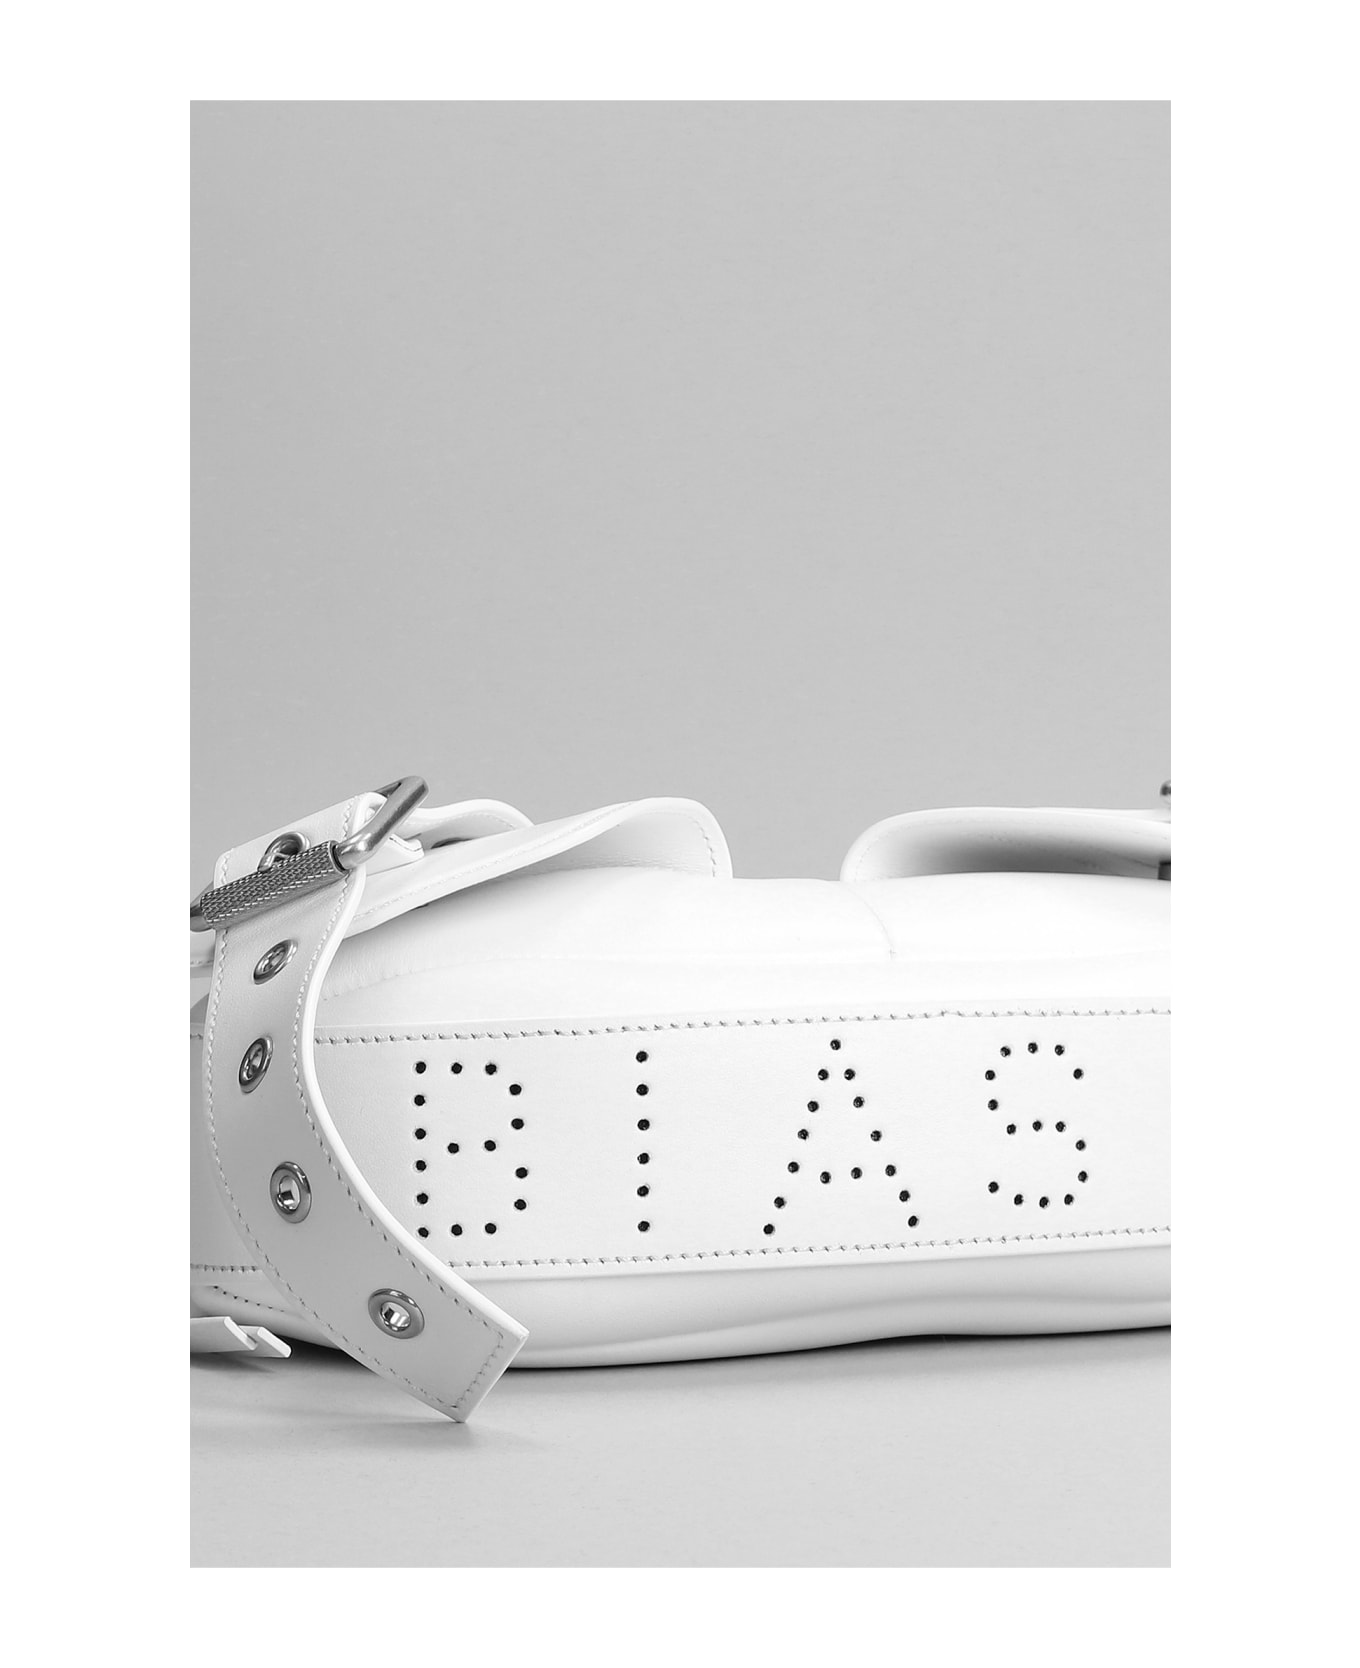 Biasia Shoulder Bag In White Leather - white